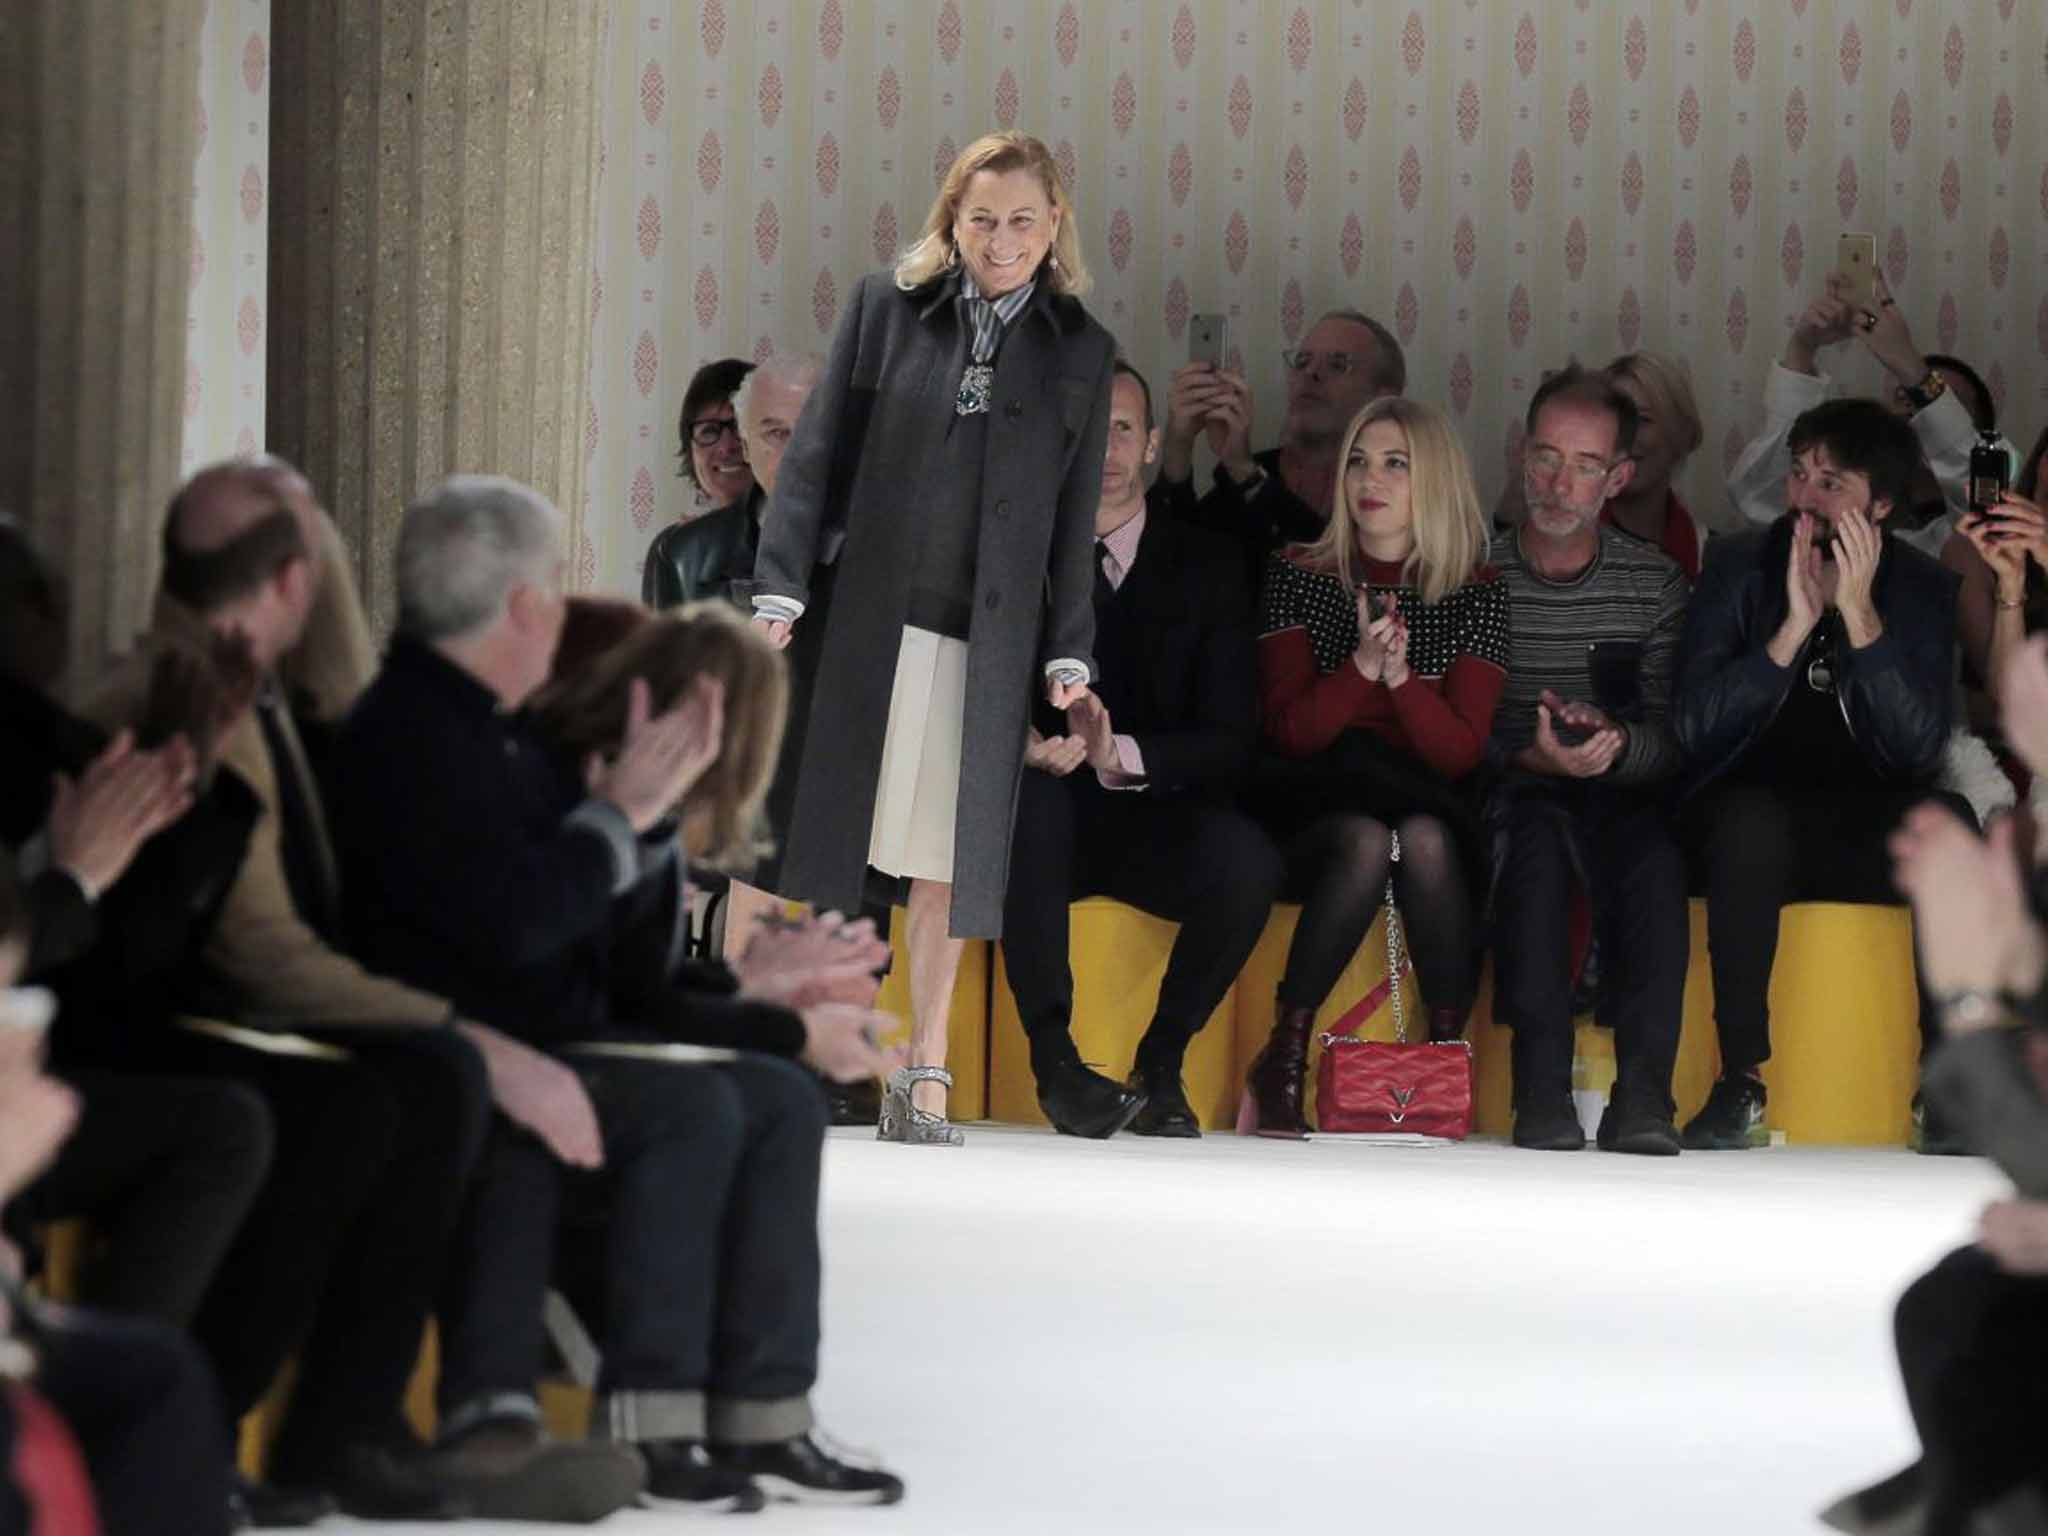 Miuccia Prada takes the applause after the presentation of Miu Miu's ready-to-wear fall-winter 2015-2016 collection at Paris fashion week